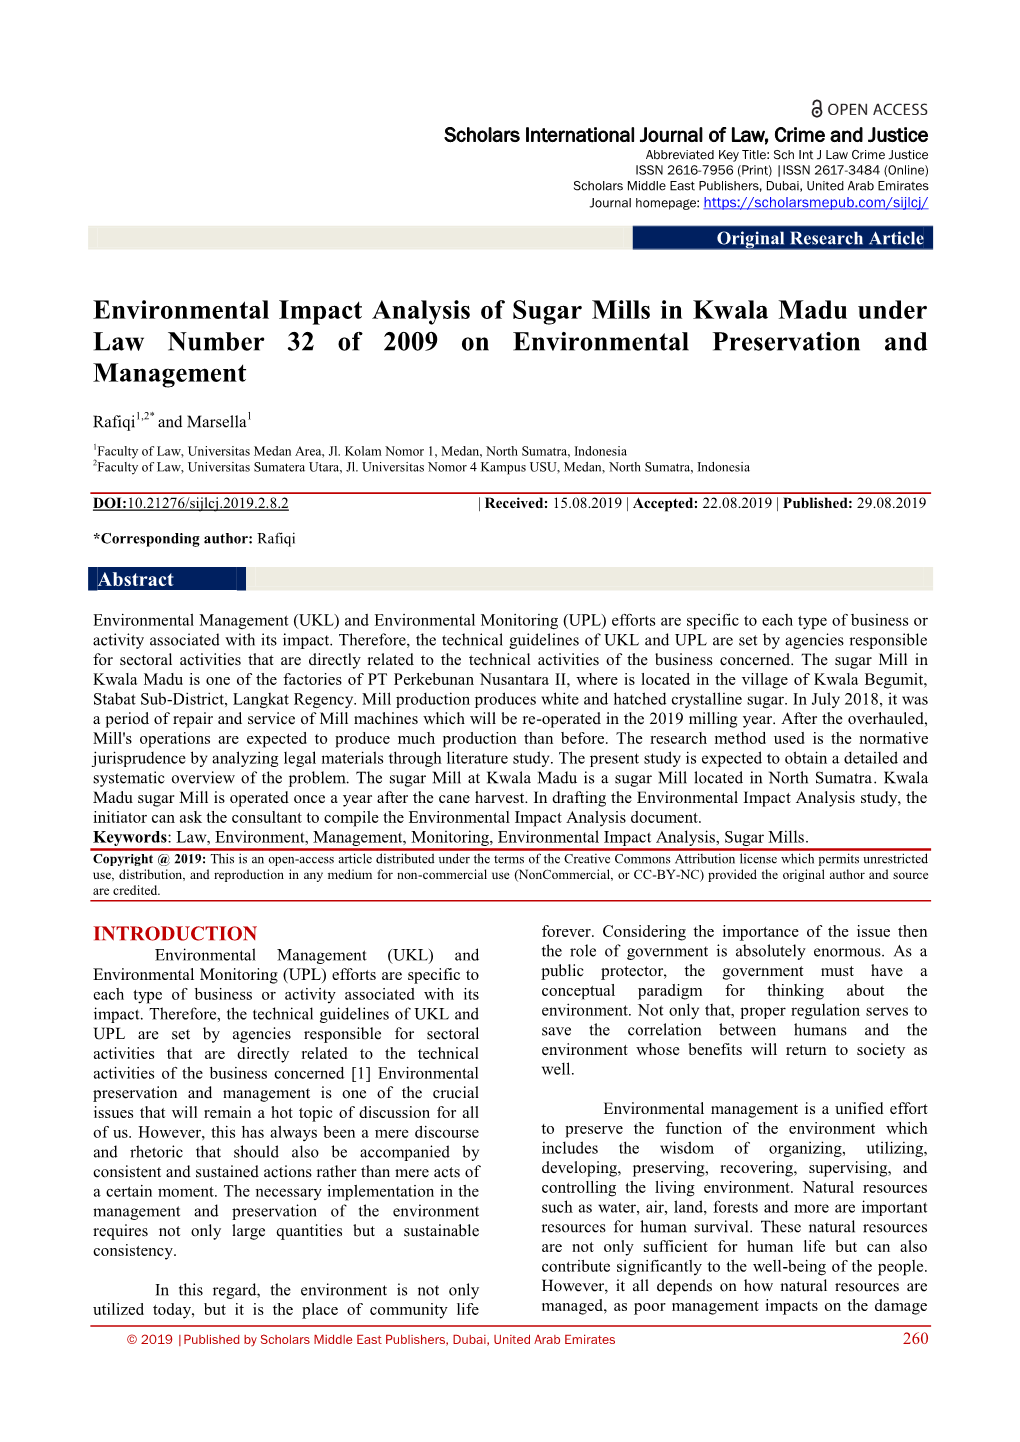 Environmental Impact Analysis of Sugar Mills in Kwala Madu Under Law Number 32 of 2009 on Environmental Preservation and Management